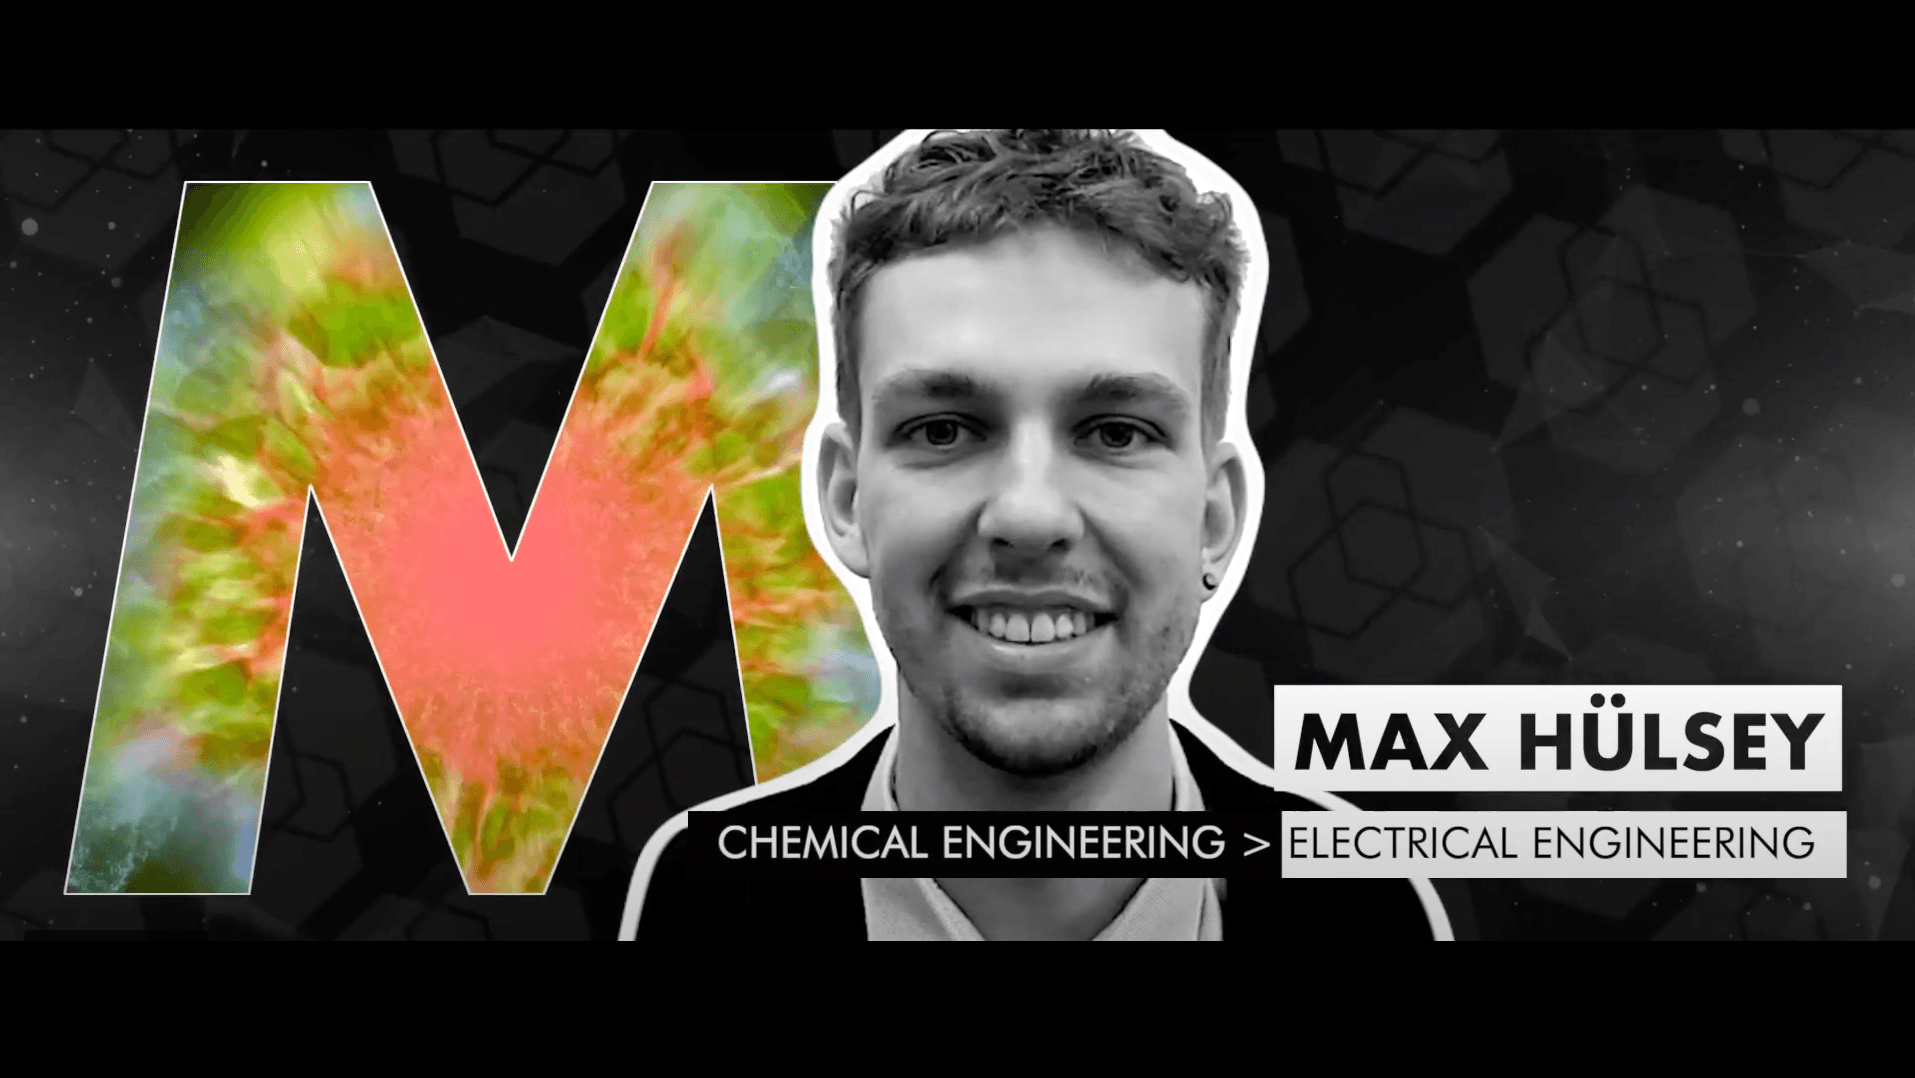 Max says he aims to continue his work on combining thermal and electrocatalysis for the carbon-neutral production of chemicals and fuels from greenhouse gases [Image: Schmidt Science Fellowship]